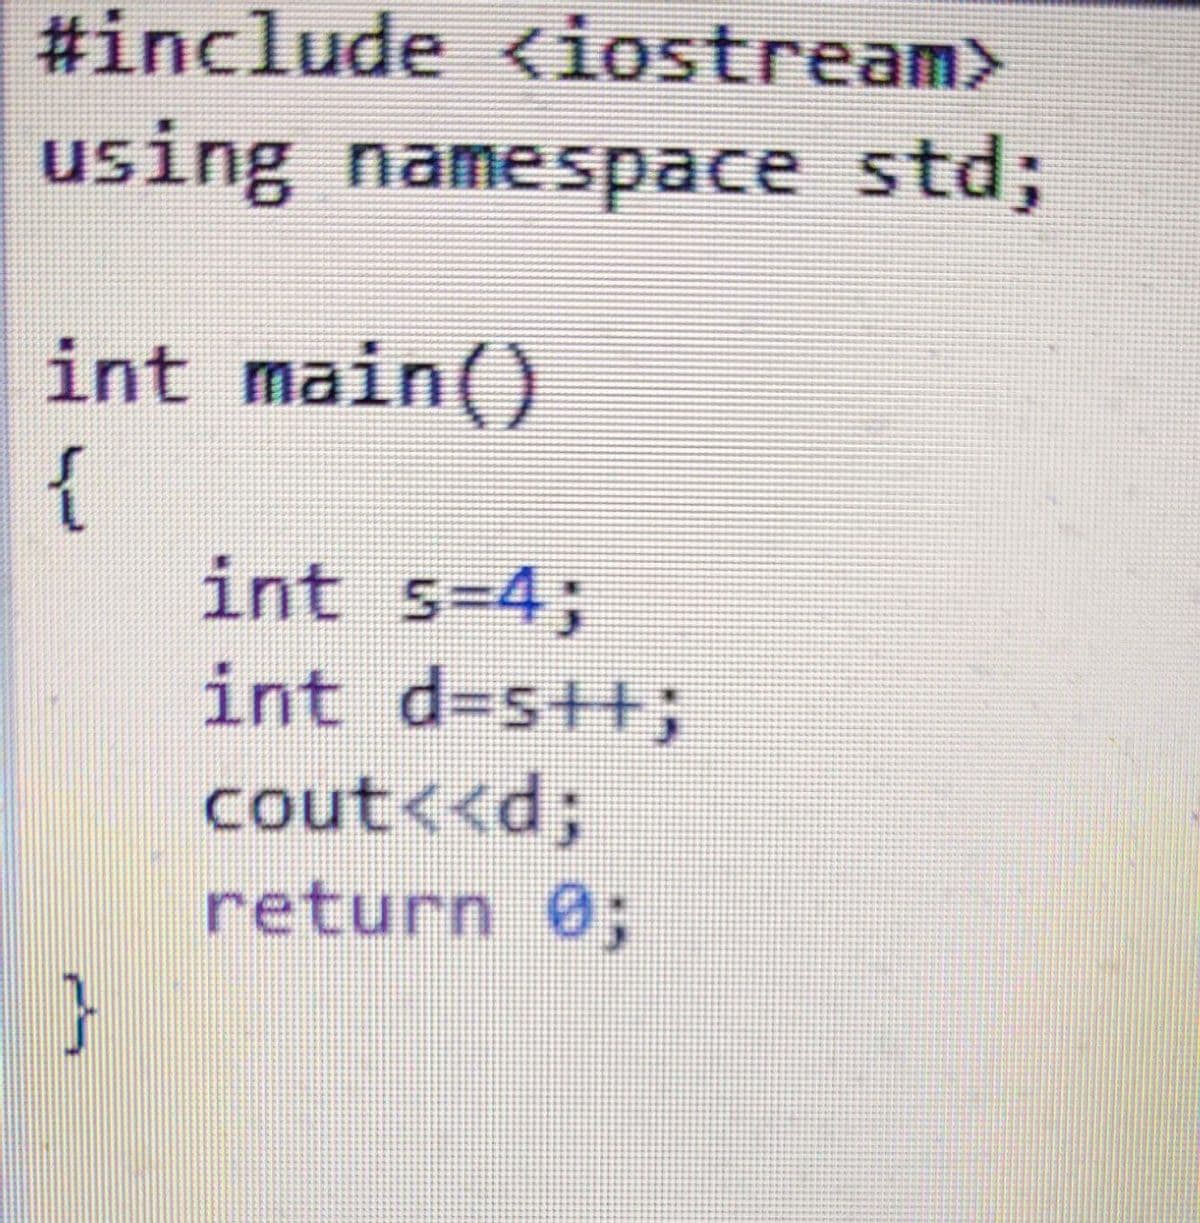 #include <iostream>
using namespace std3;
int main()
{
int s=4;
int d-s++;
cout<<d;
return 0;
